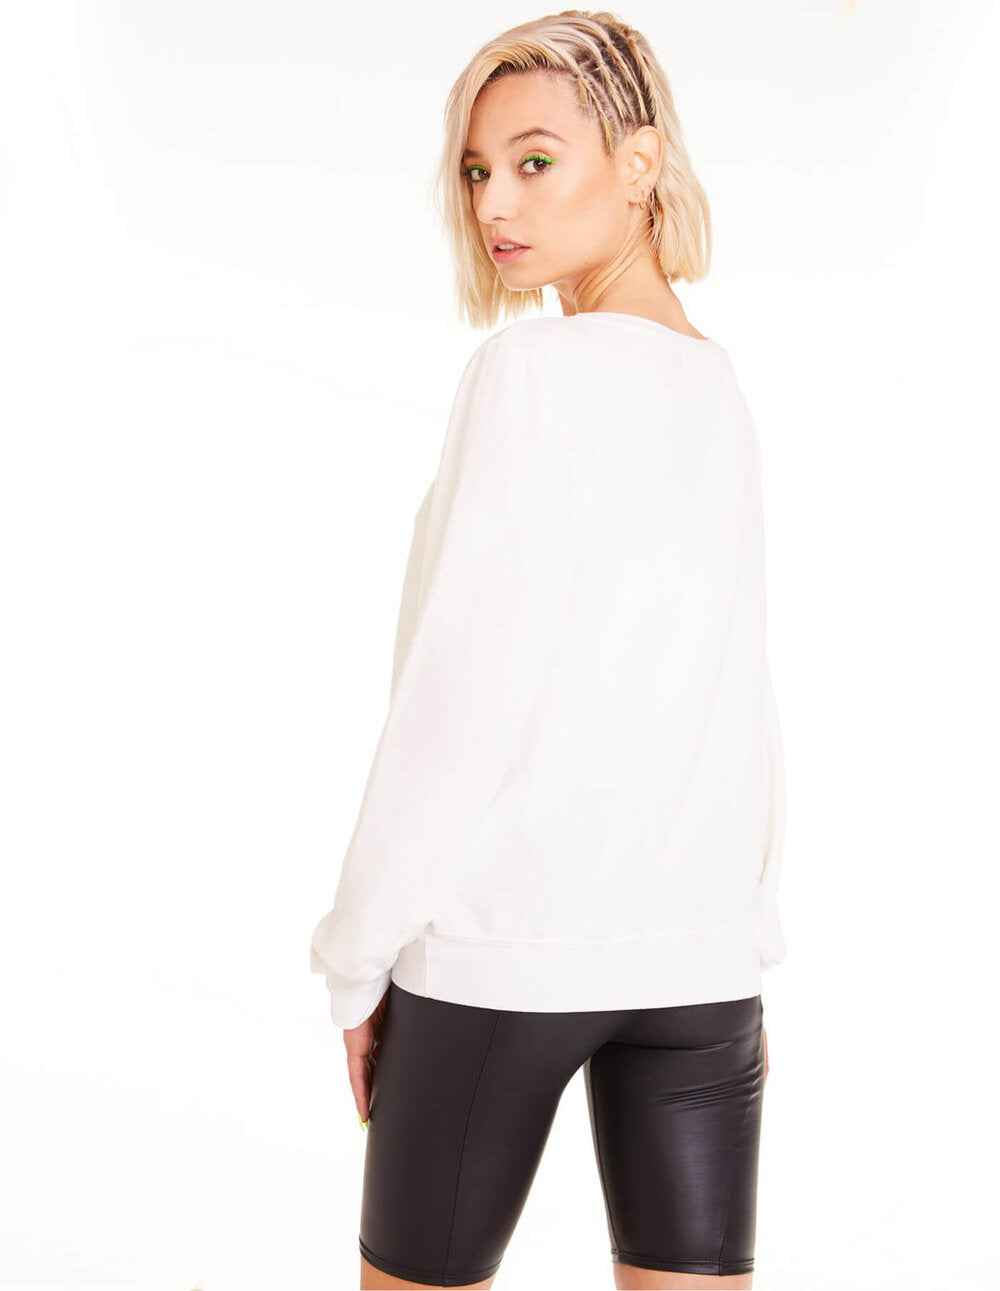 Chic Statement Casual Long Sleeve Tee